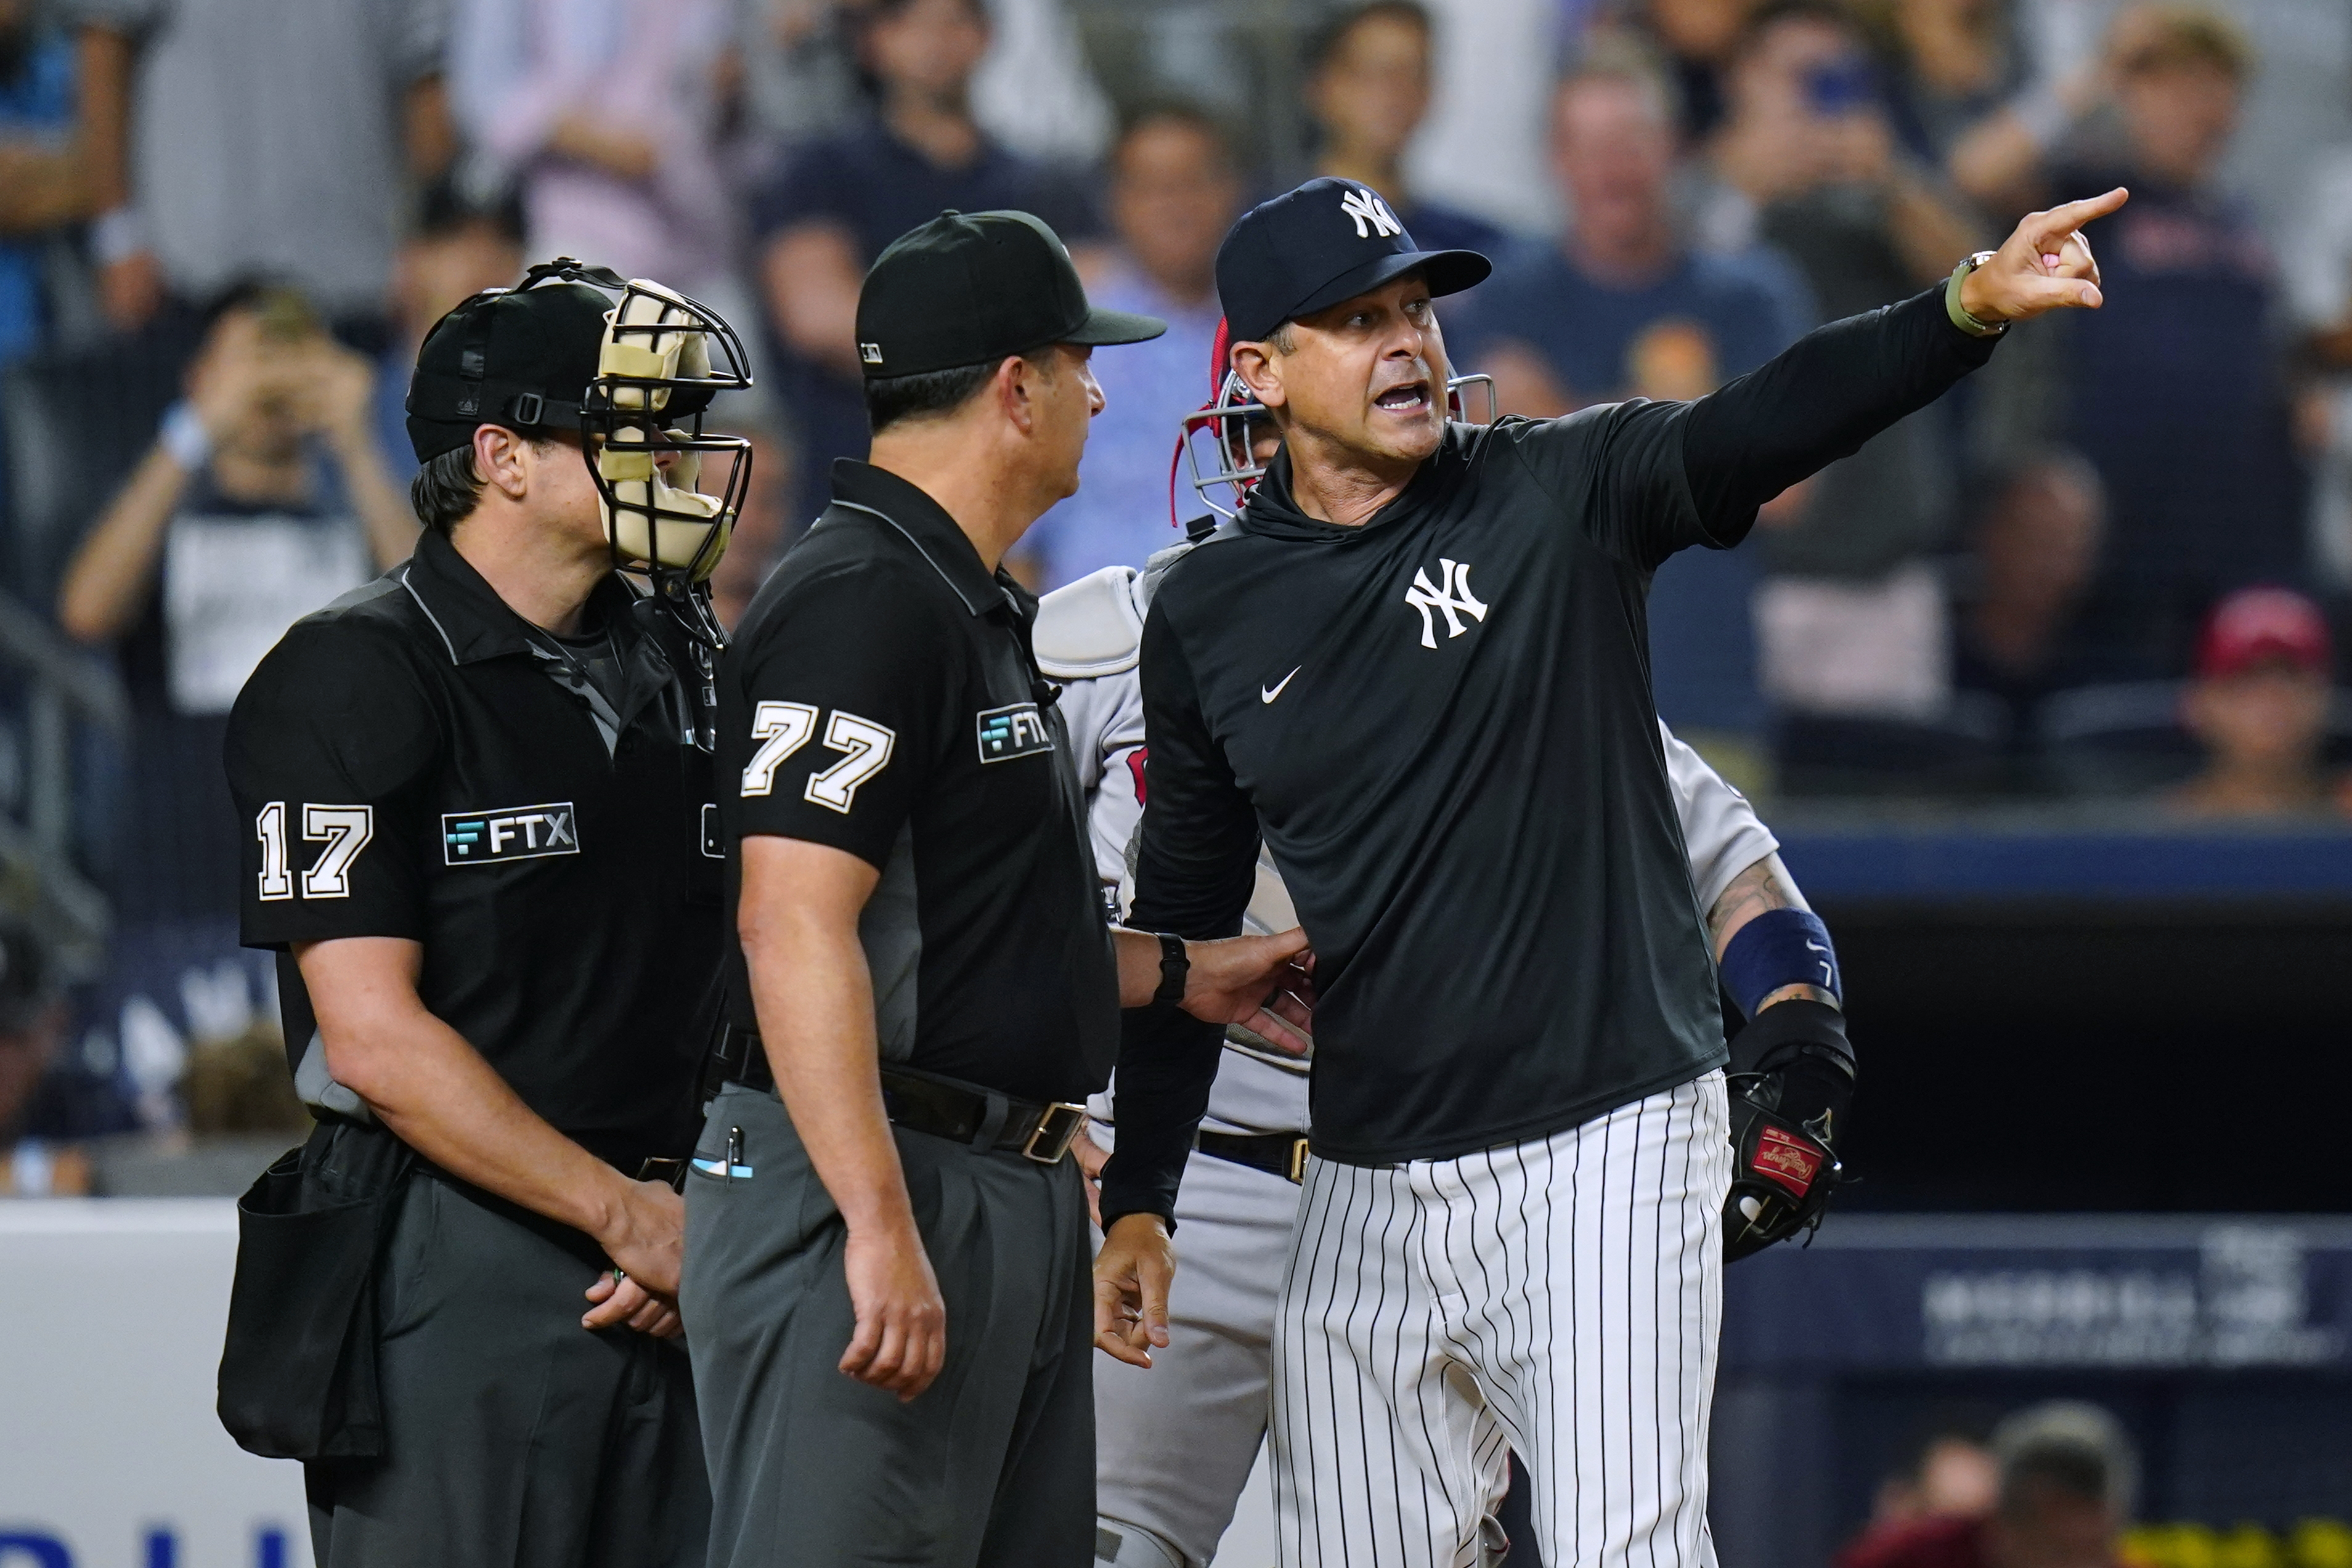 Three ejected as benches clear twice in game between New York